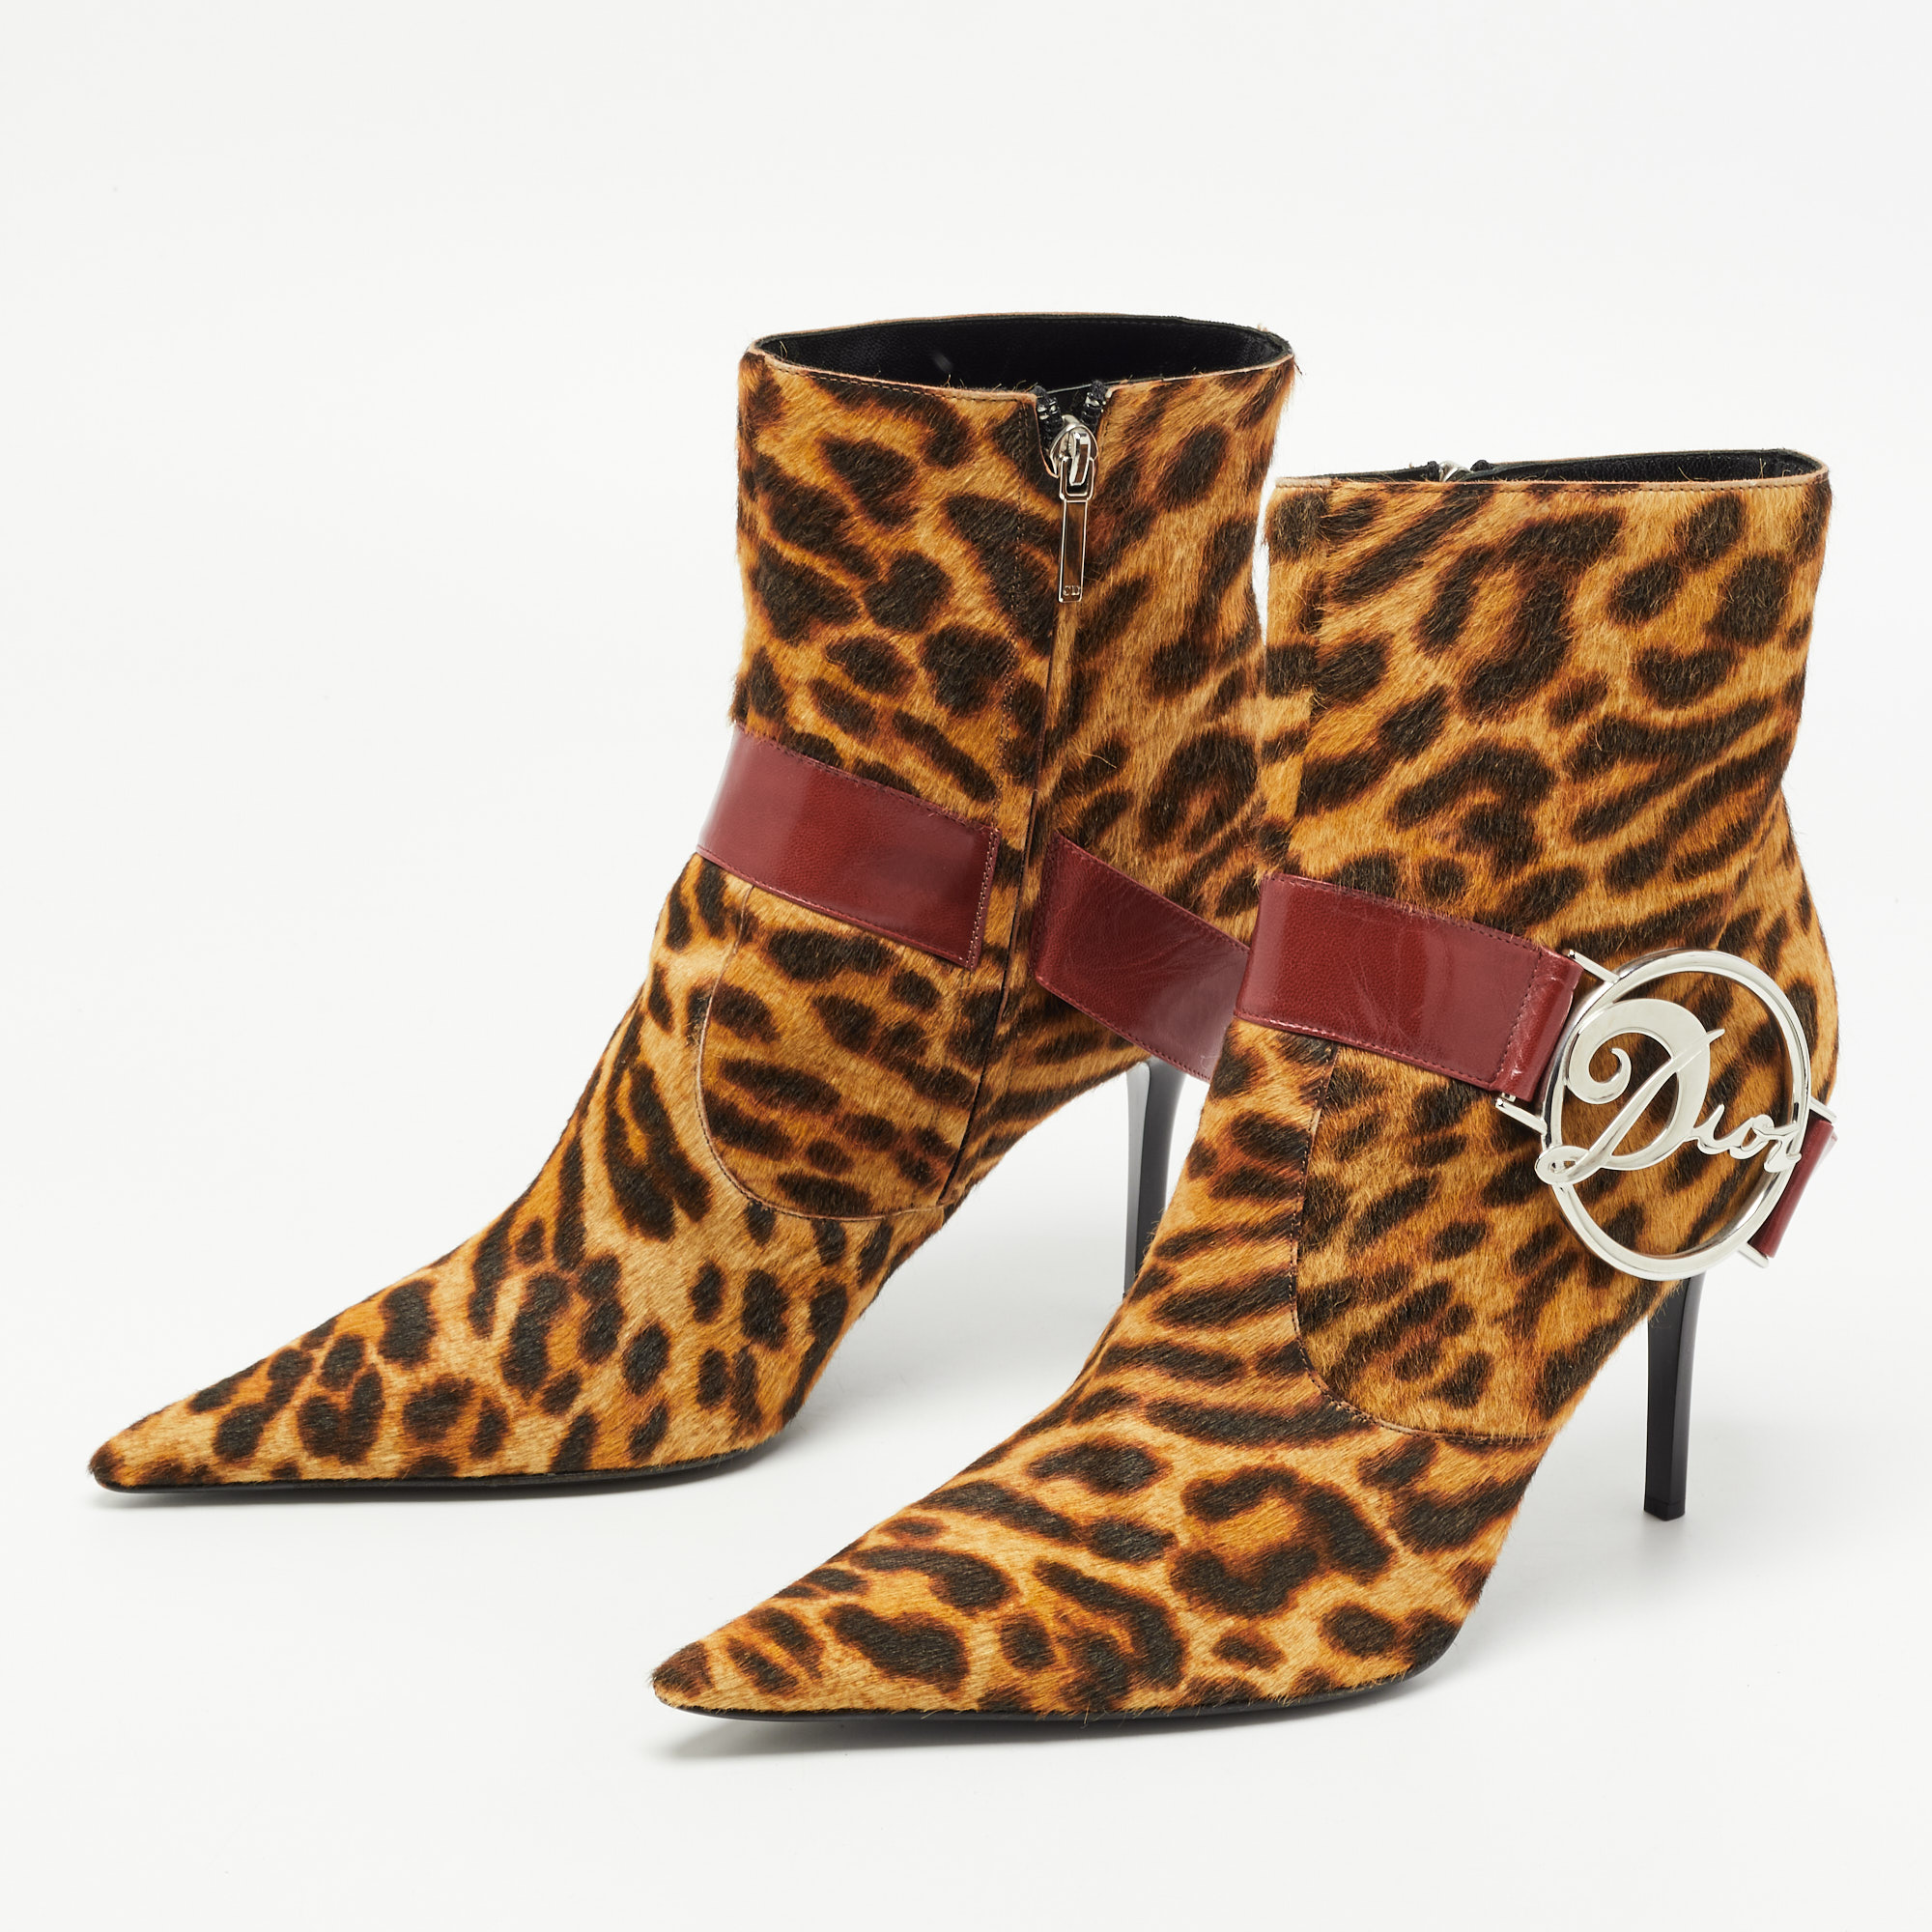 

Dior Tricolor Leopard Print Calf Hair and Leather Ankle Booties Size, Brown